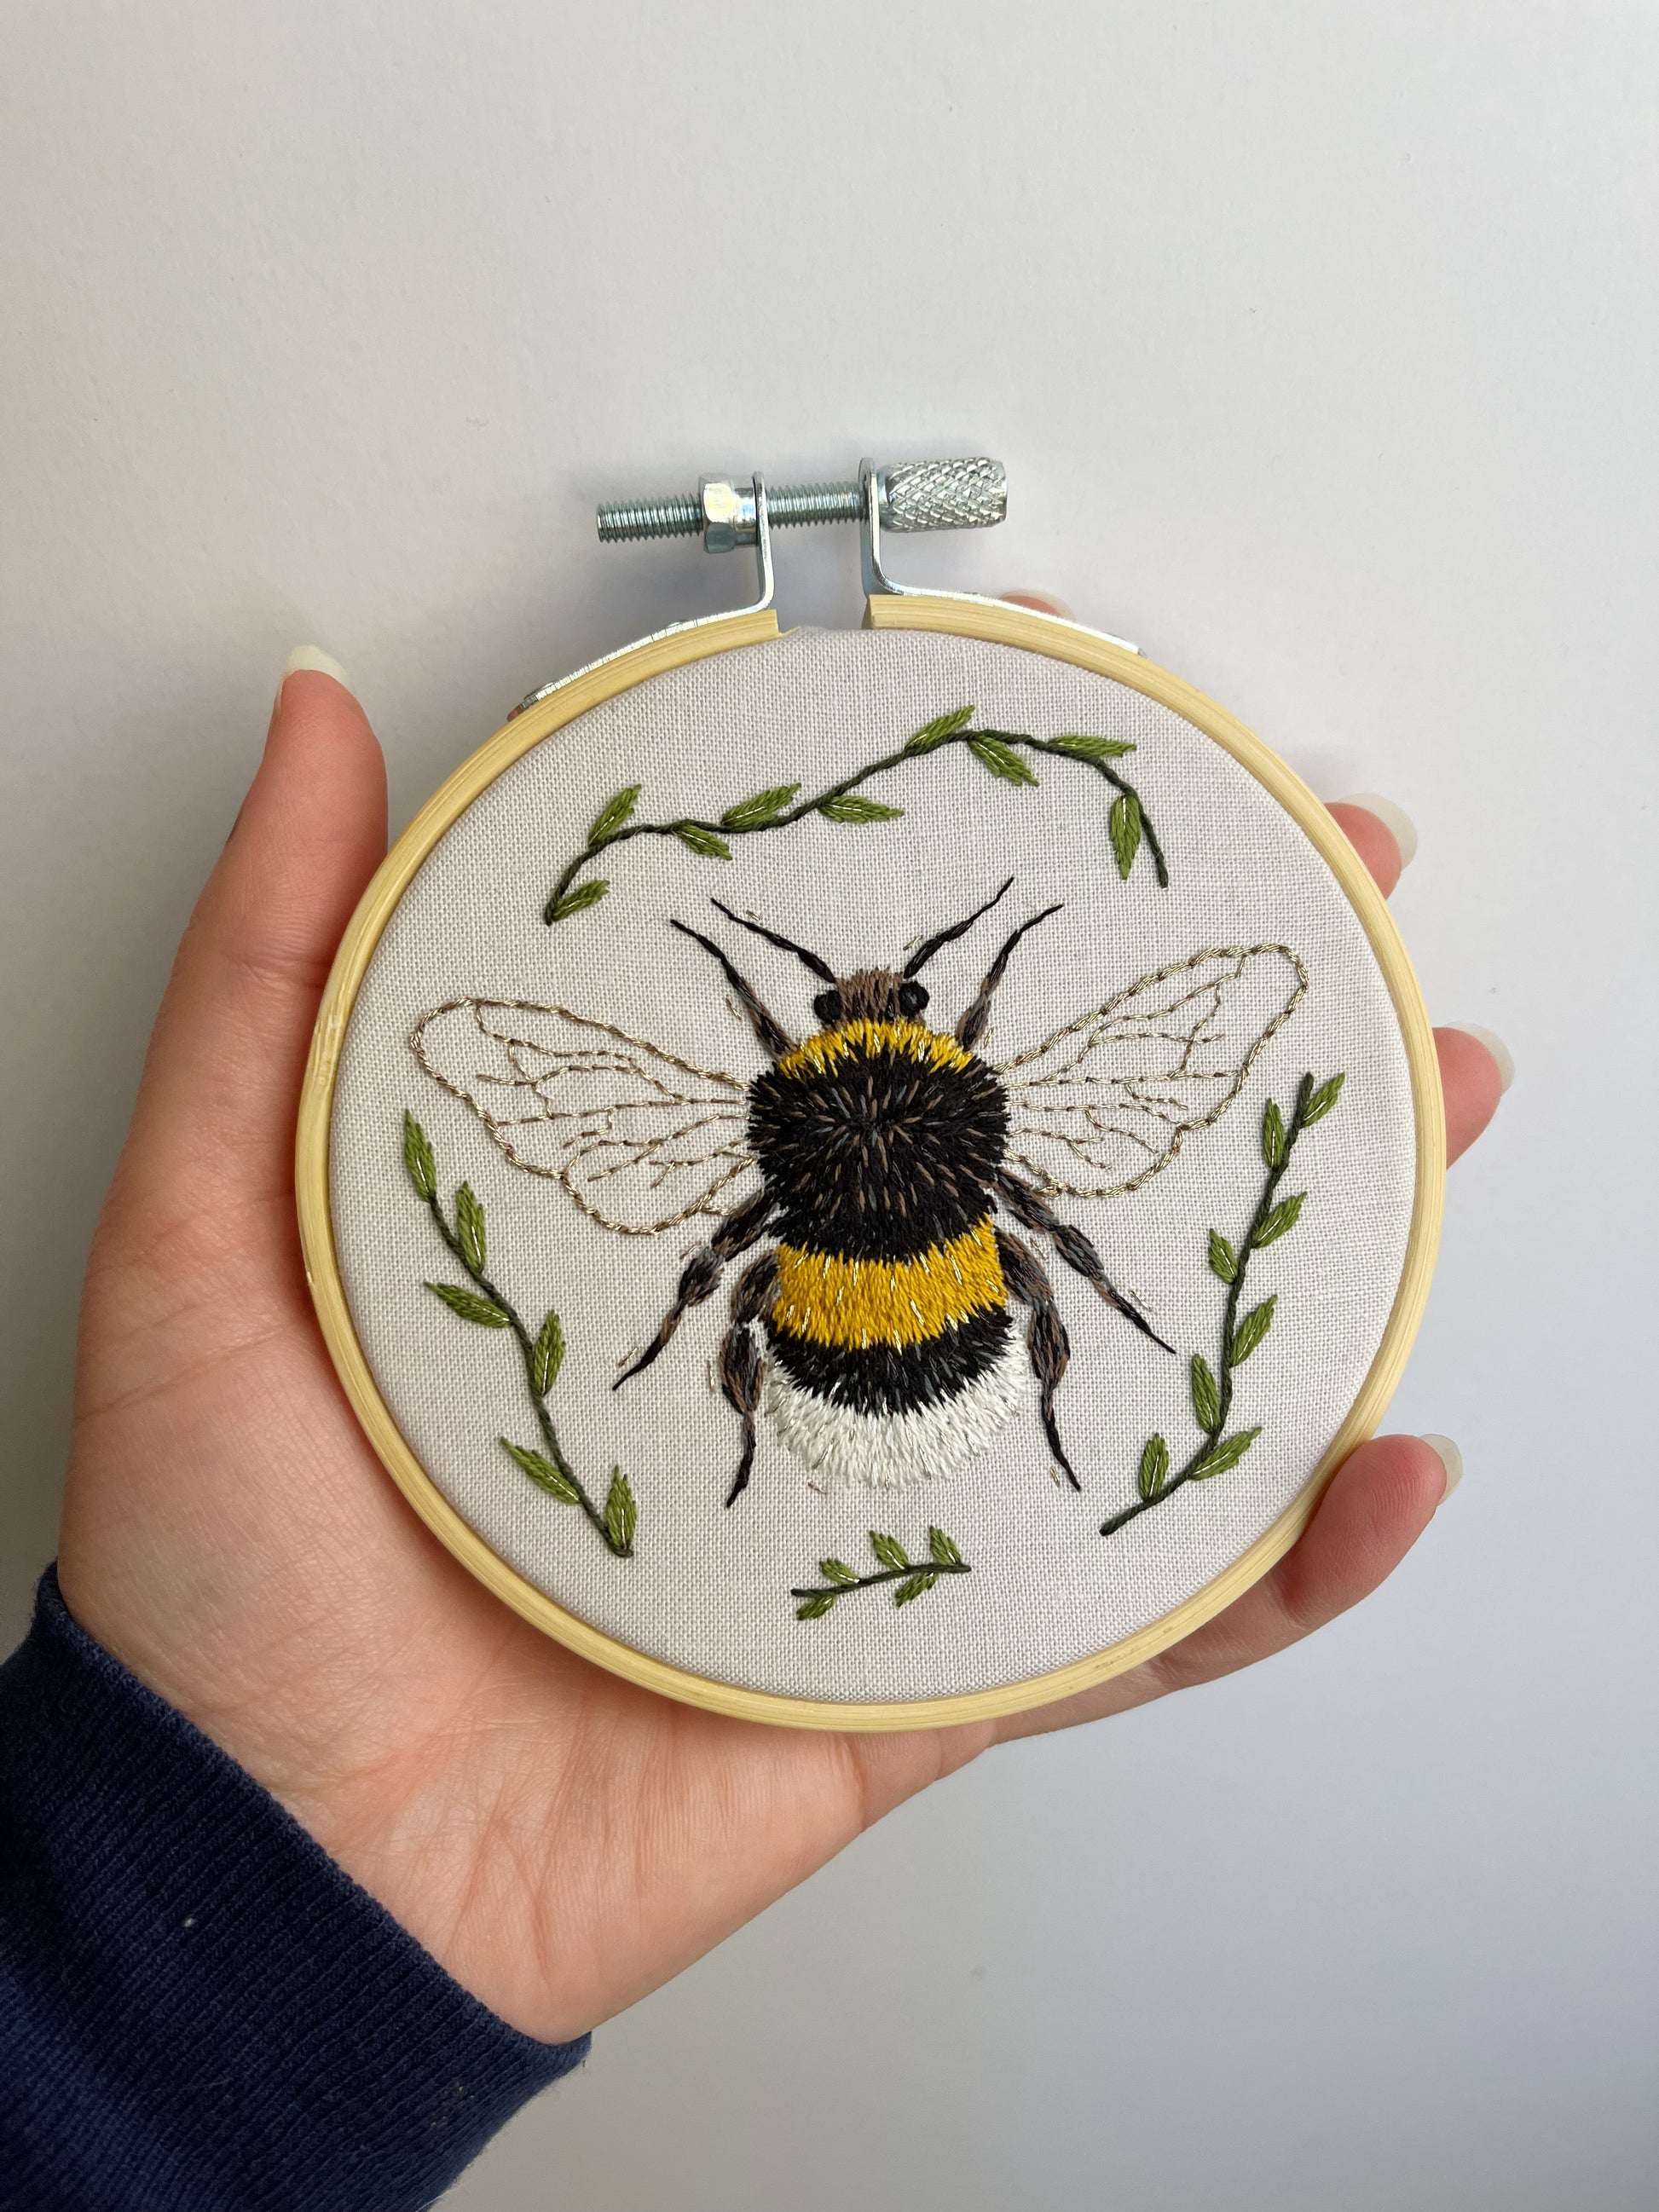 Embroidery Kit - Stick and Stitch Embroidery Patterns - Bee Kit